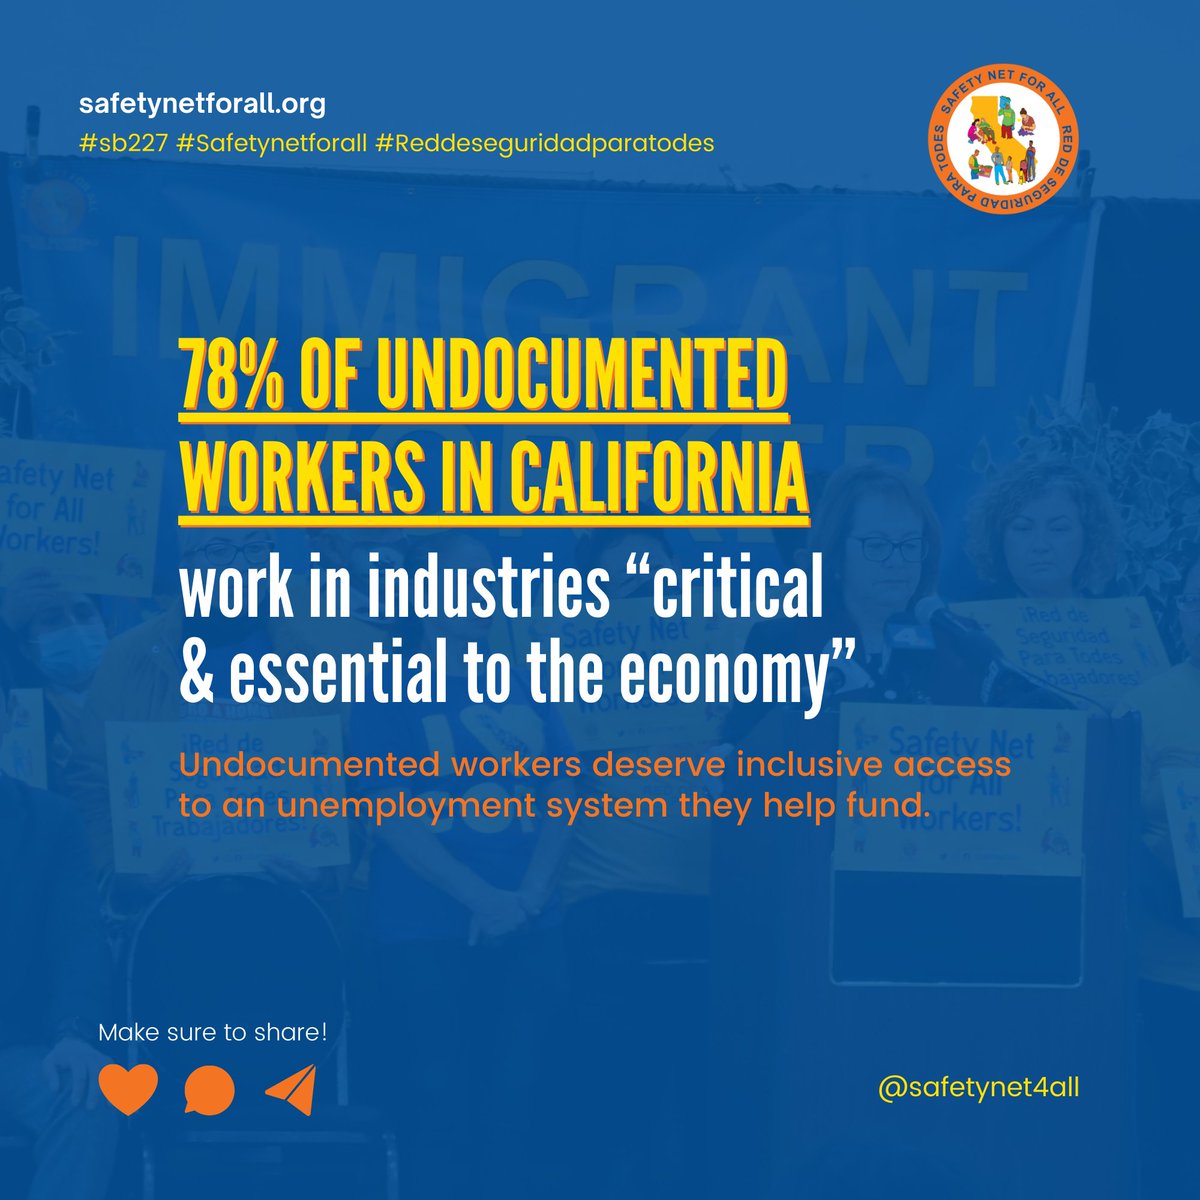 Everyone deserves a #SafetyNet regardless of immigration status. We need undocumented workers to access unemployment benefits during times of job loss! Senate, we call on you to pass #SB227! #SafetyNetforAll